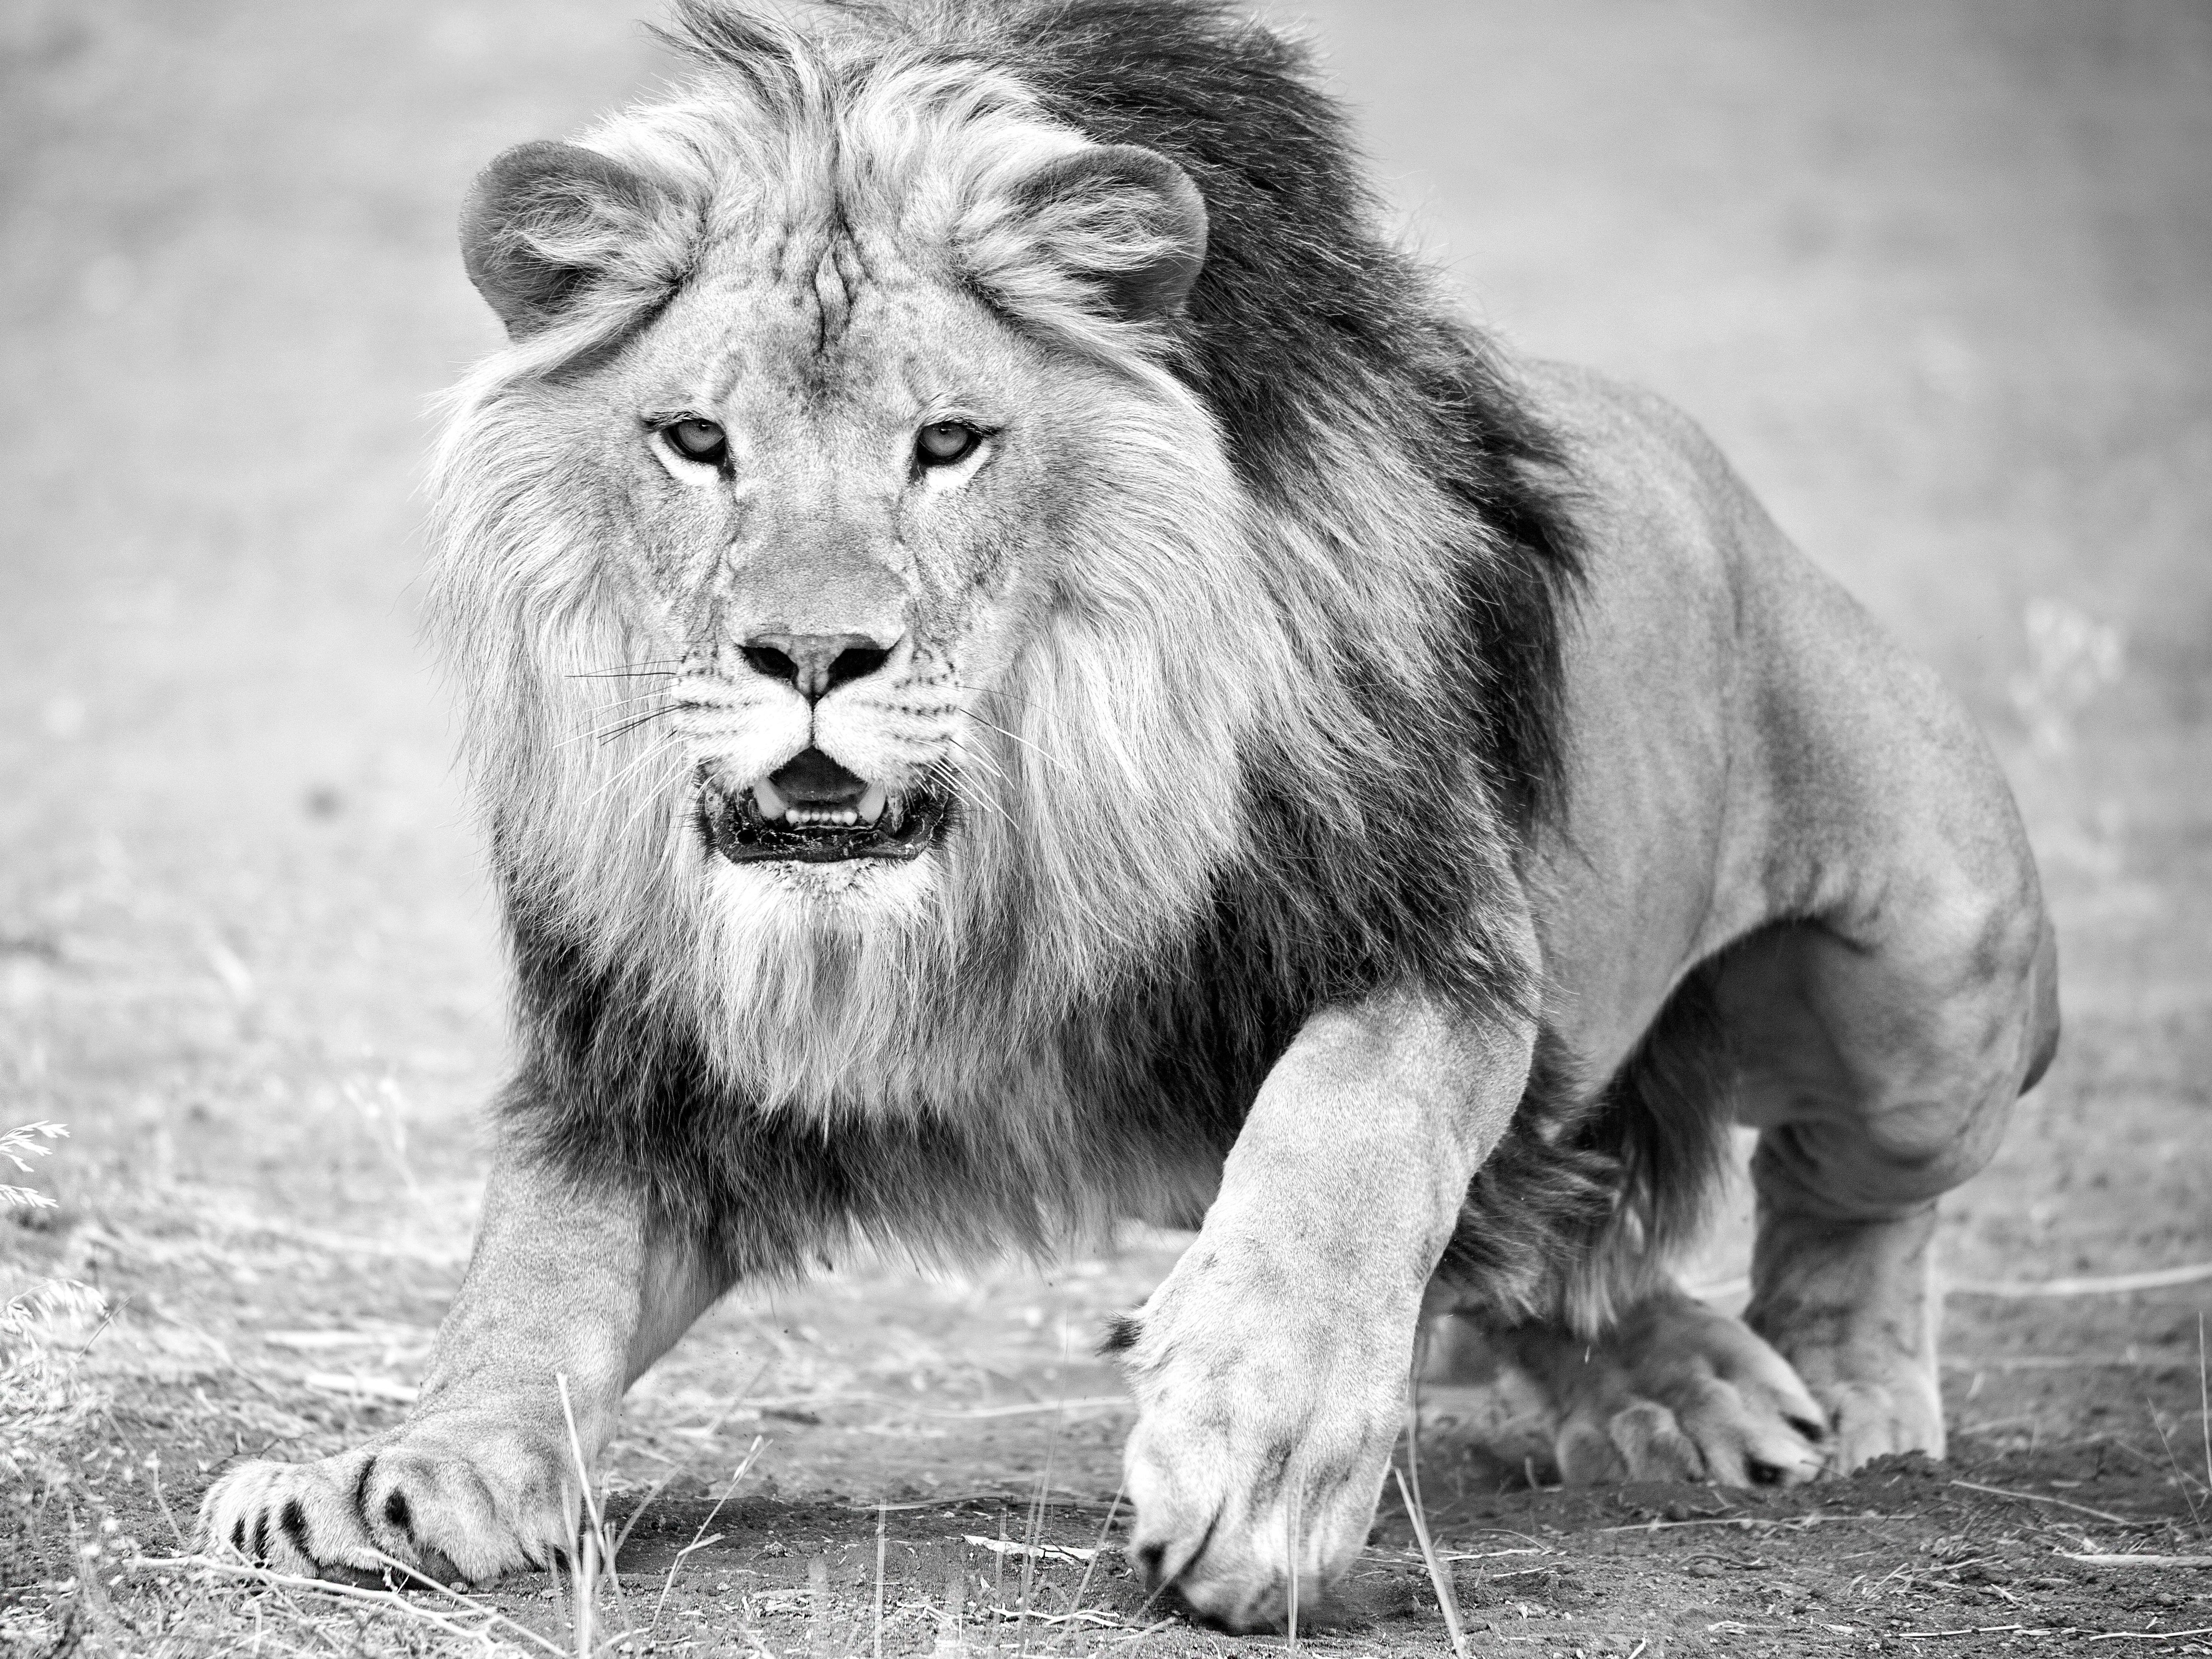 Shane Russeck Animal Print - "The Charge" 28x40 - Black & White Photography, Lion Photograph, Unsigned Print